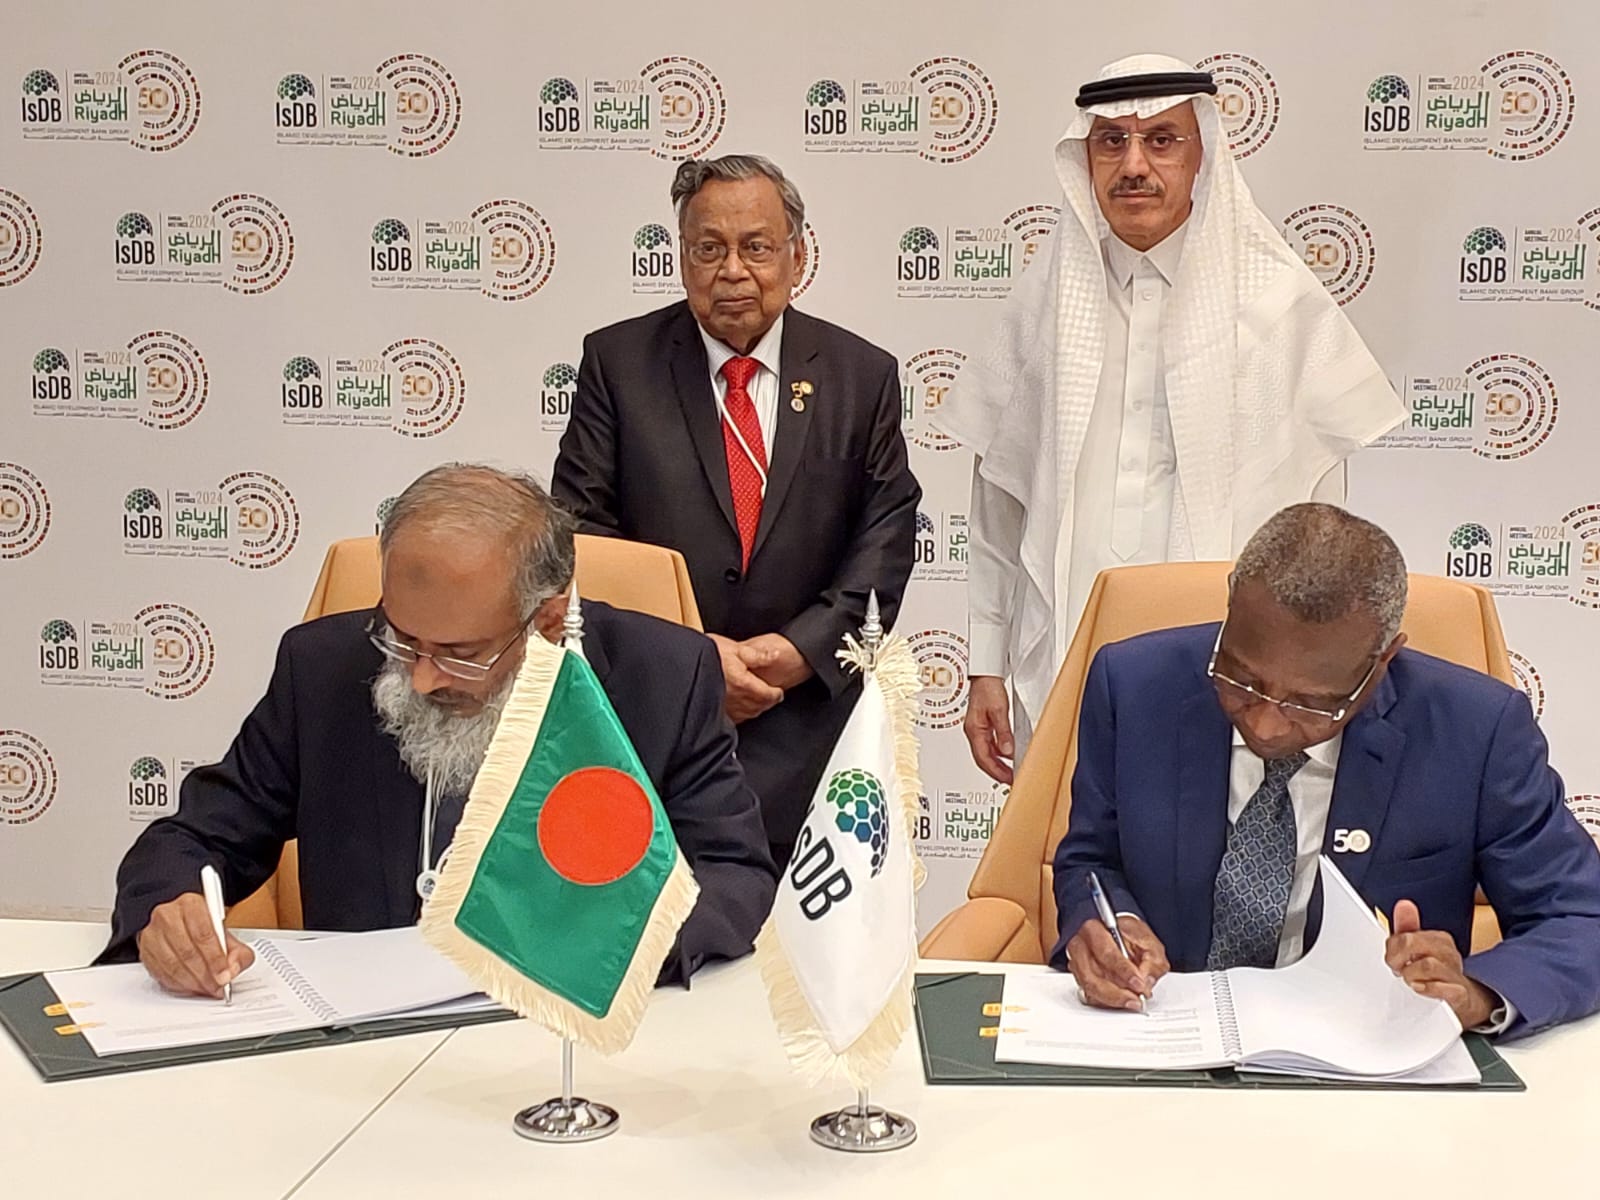 Bangladesh signs $289.52 million loan agreement with IsDB for housing finance project